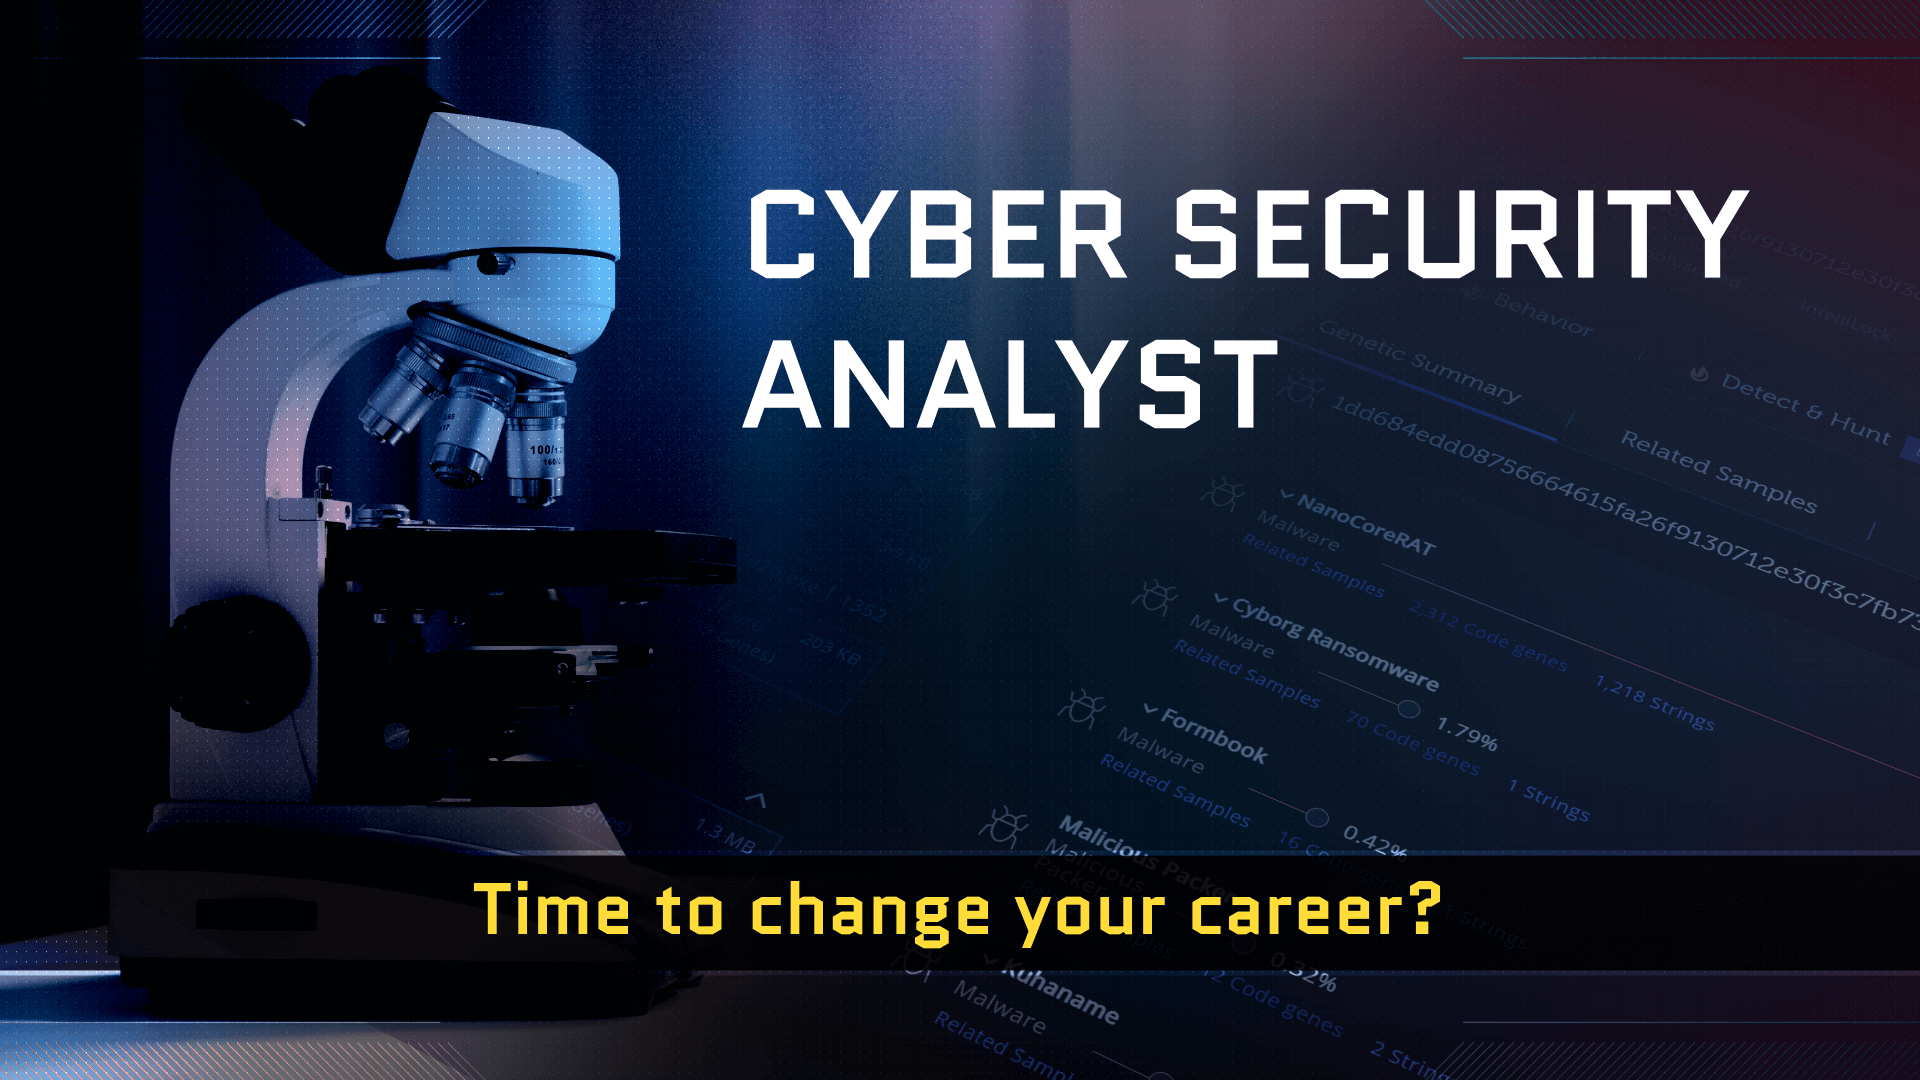 Role of a Cyber Security Analyst